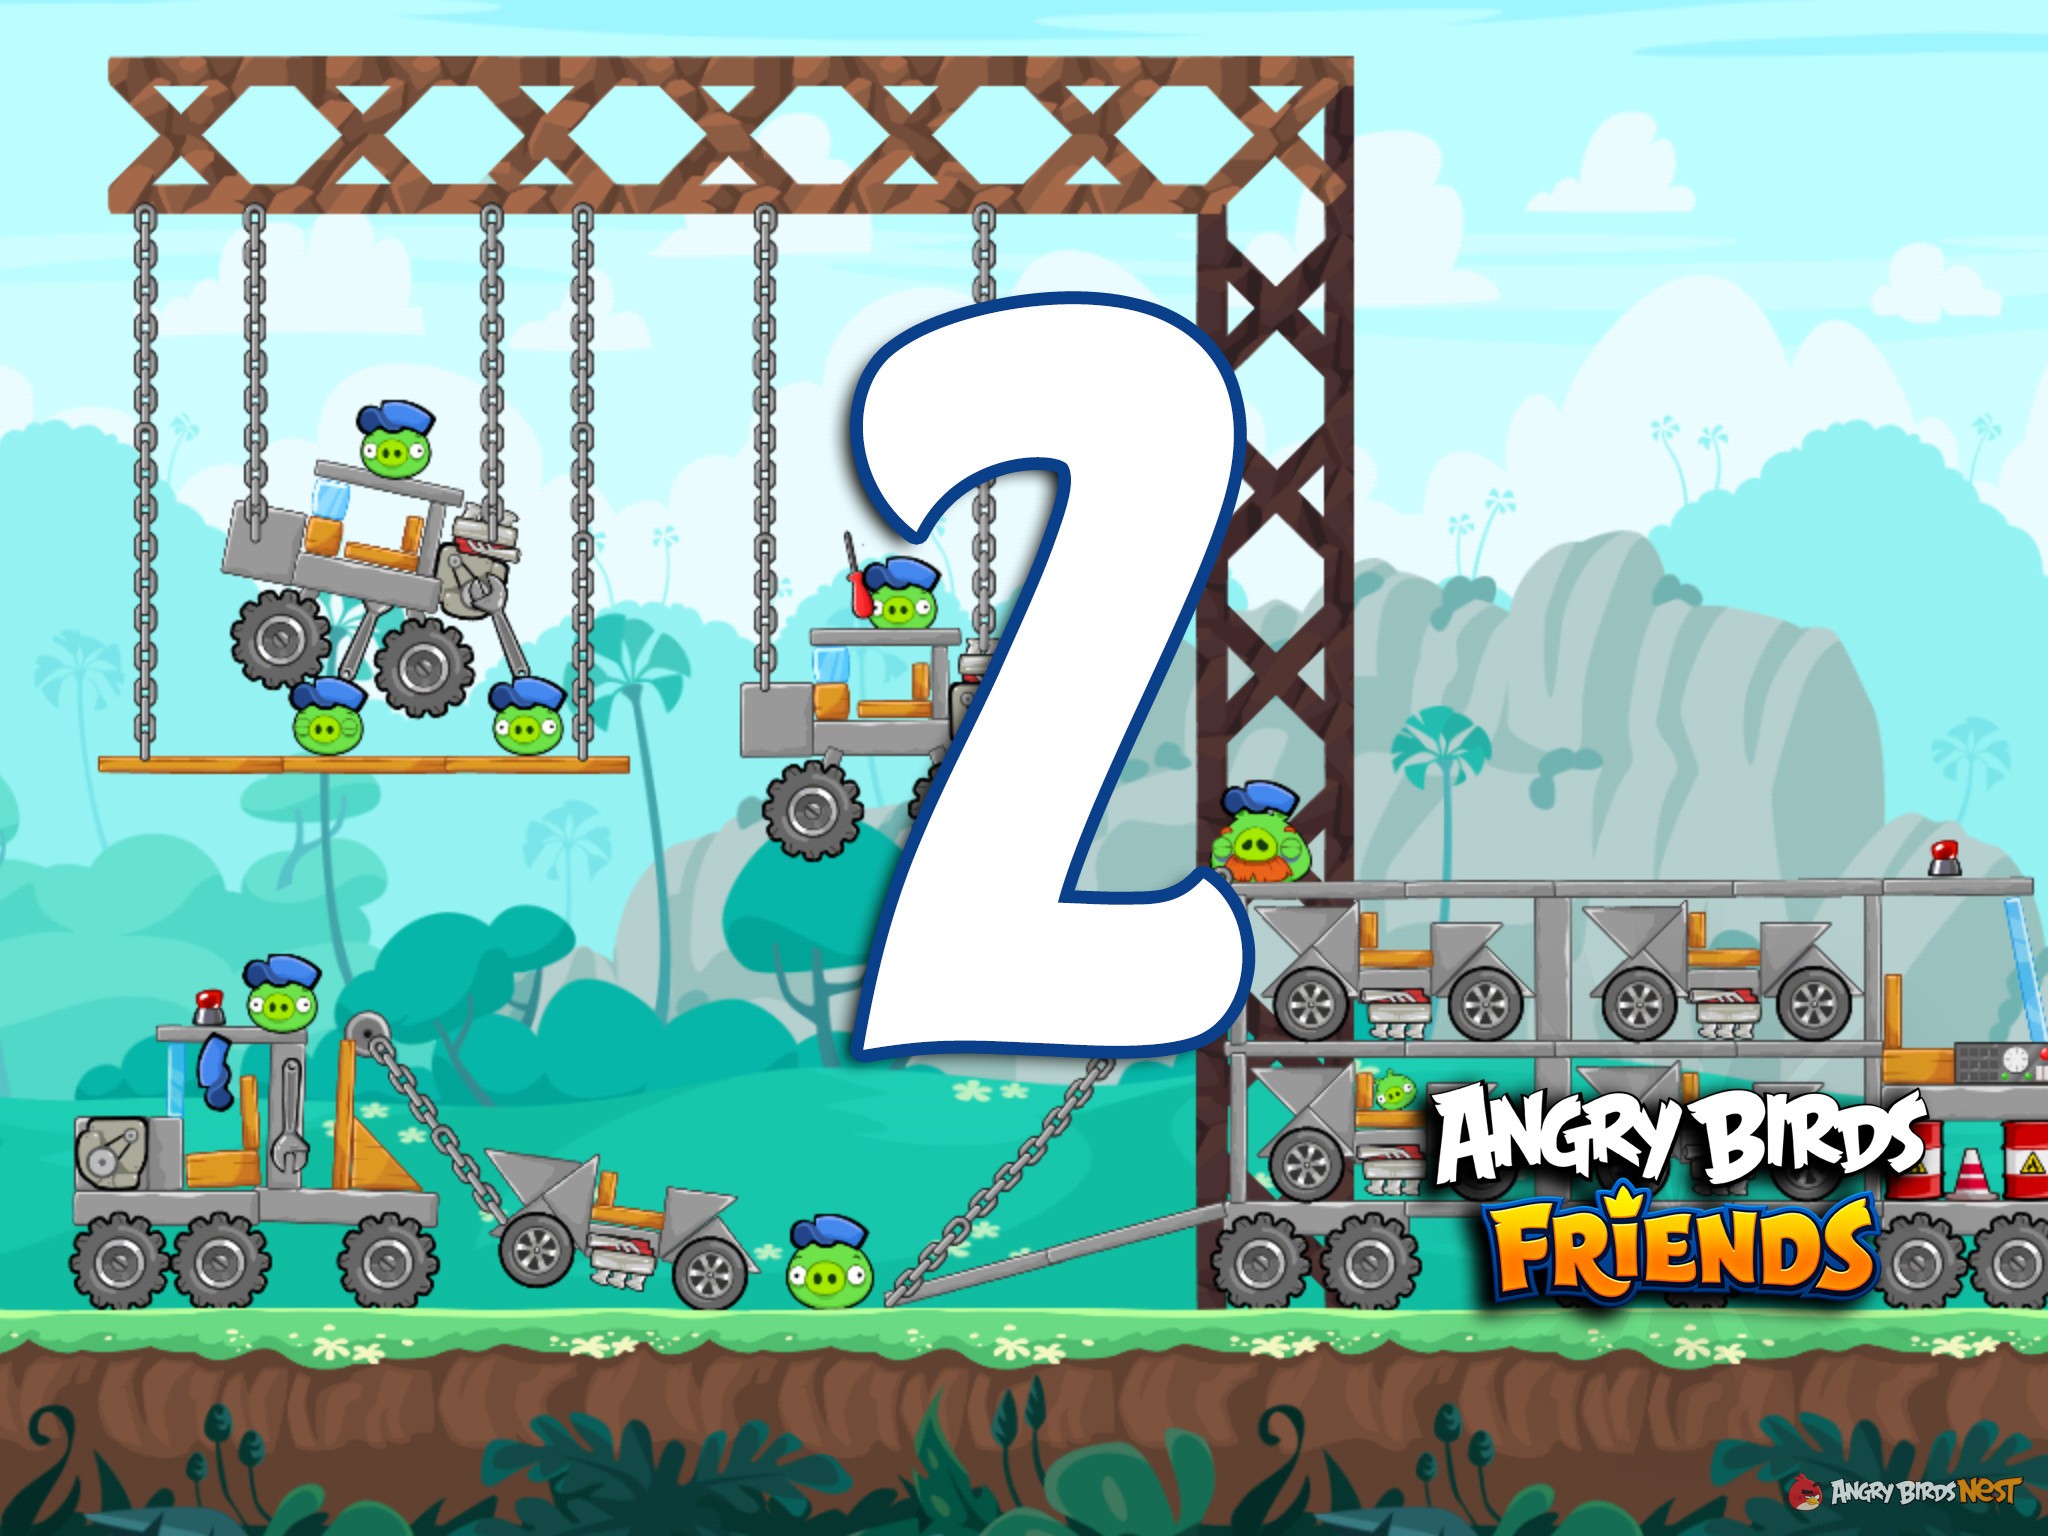 Angry Birds Friends Week 215-A Level 2